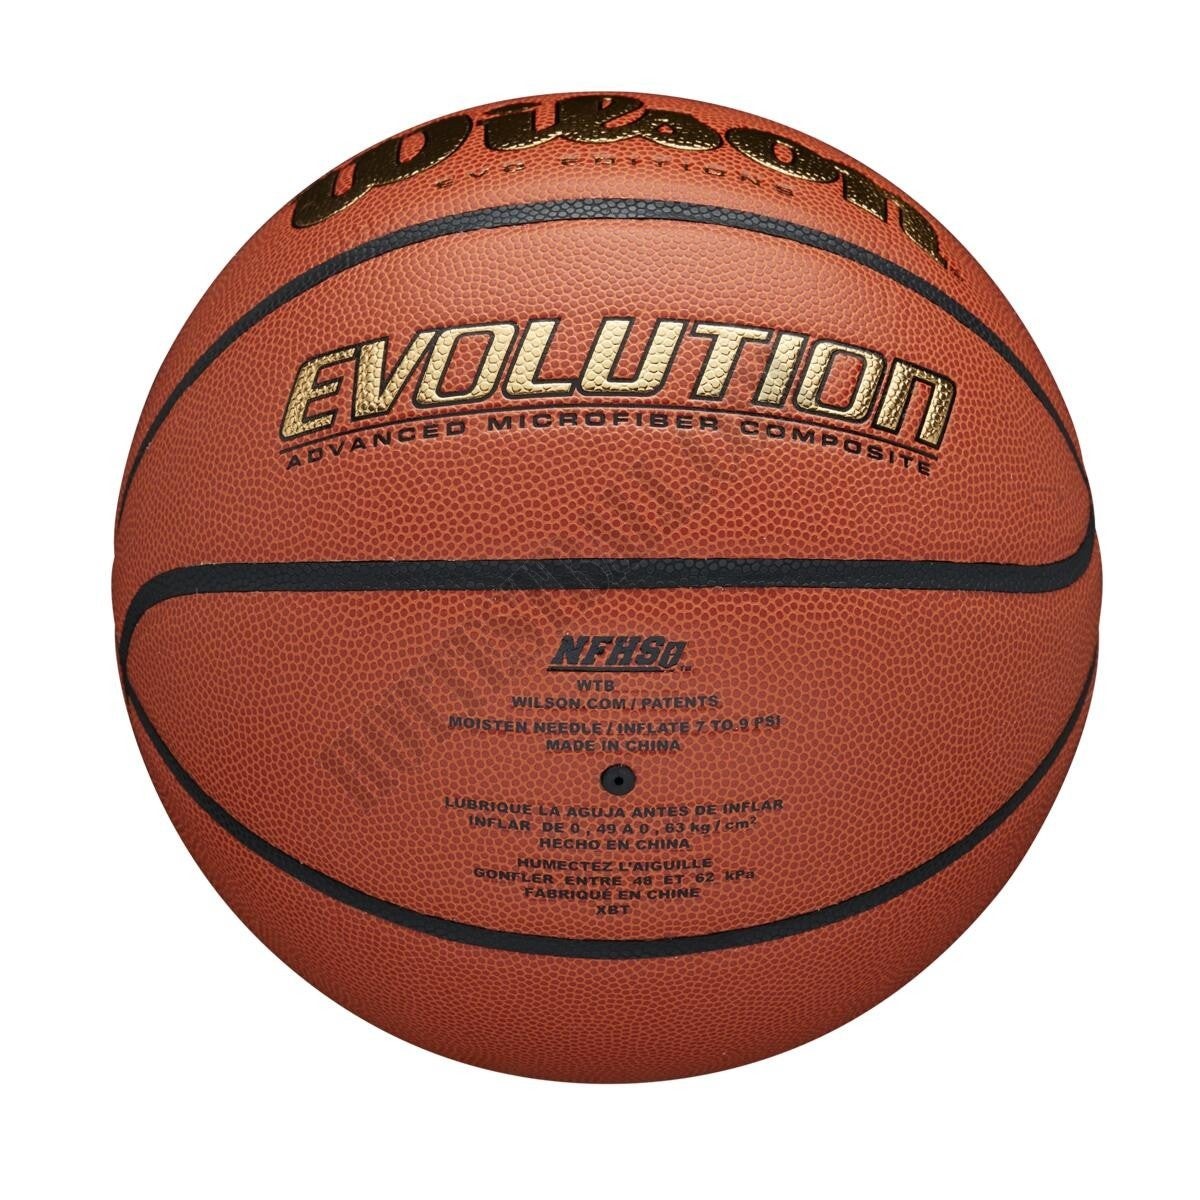 Evo Editions Gold Basketball - Wilson Discount Store - -7